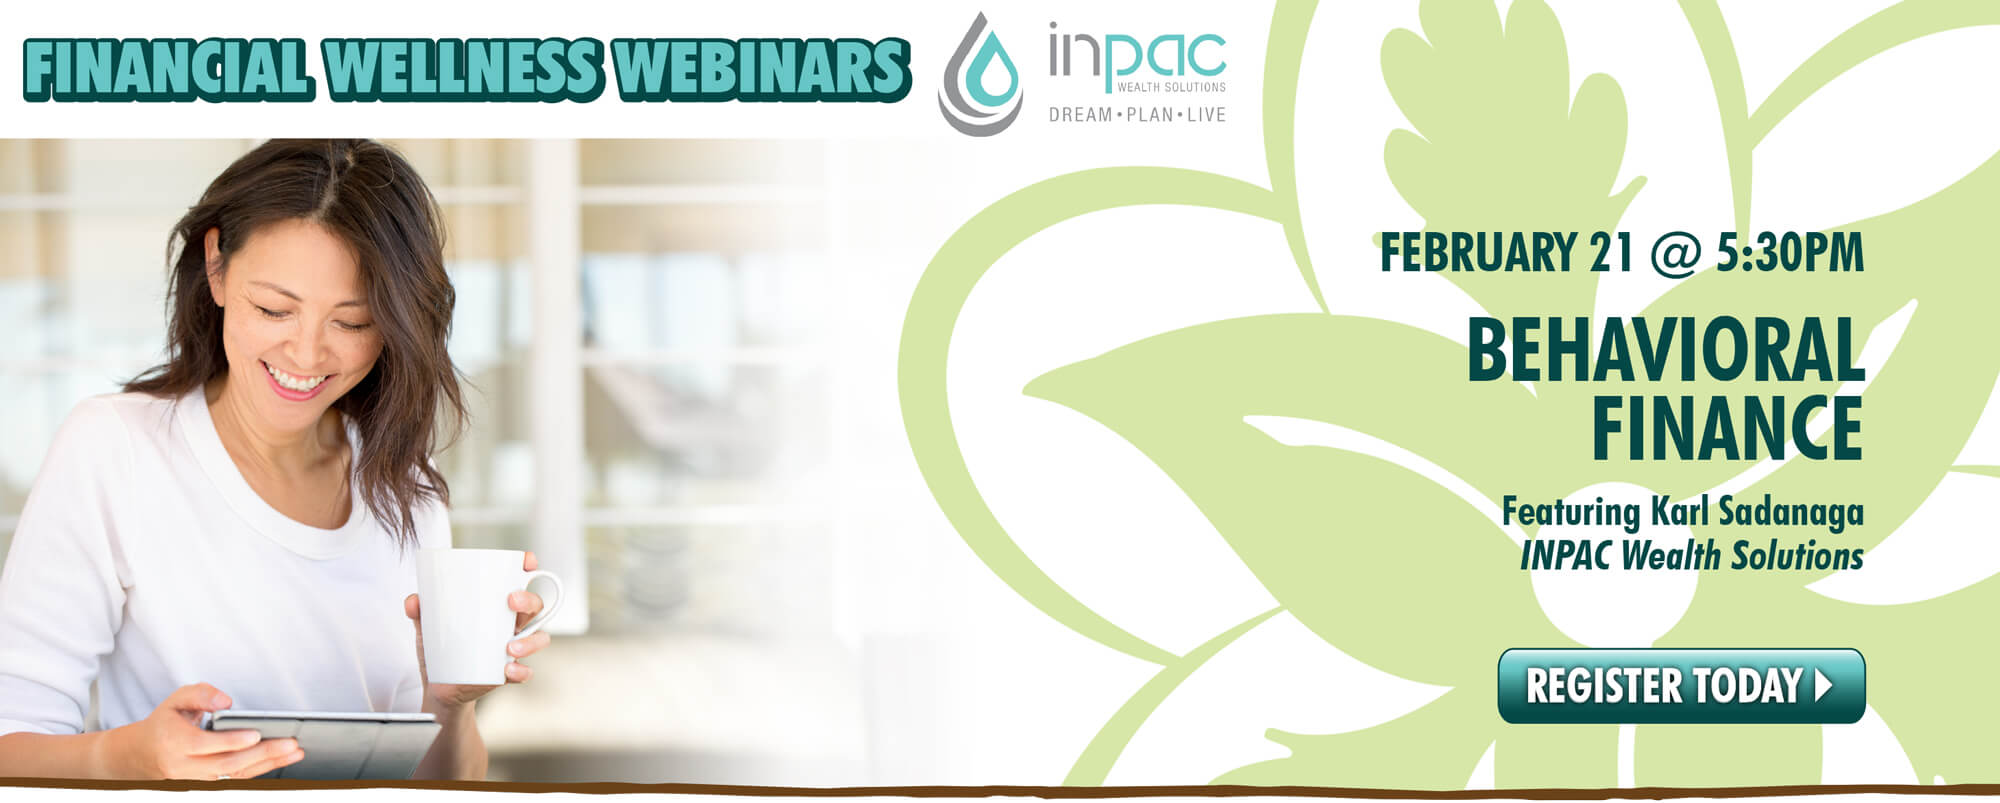 Join INPAC for their FREE webinar on Behavioral Finance.  RSVP today!